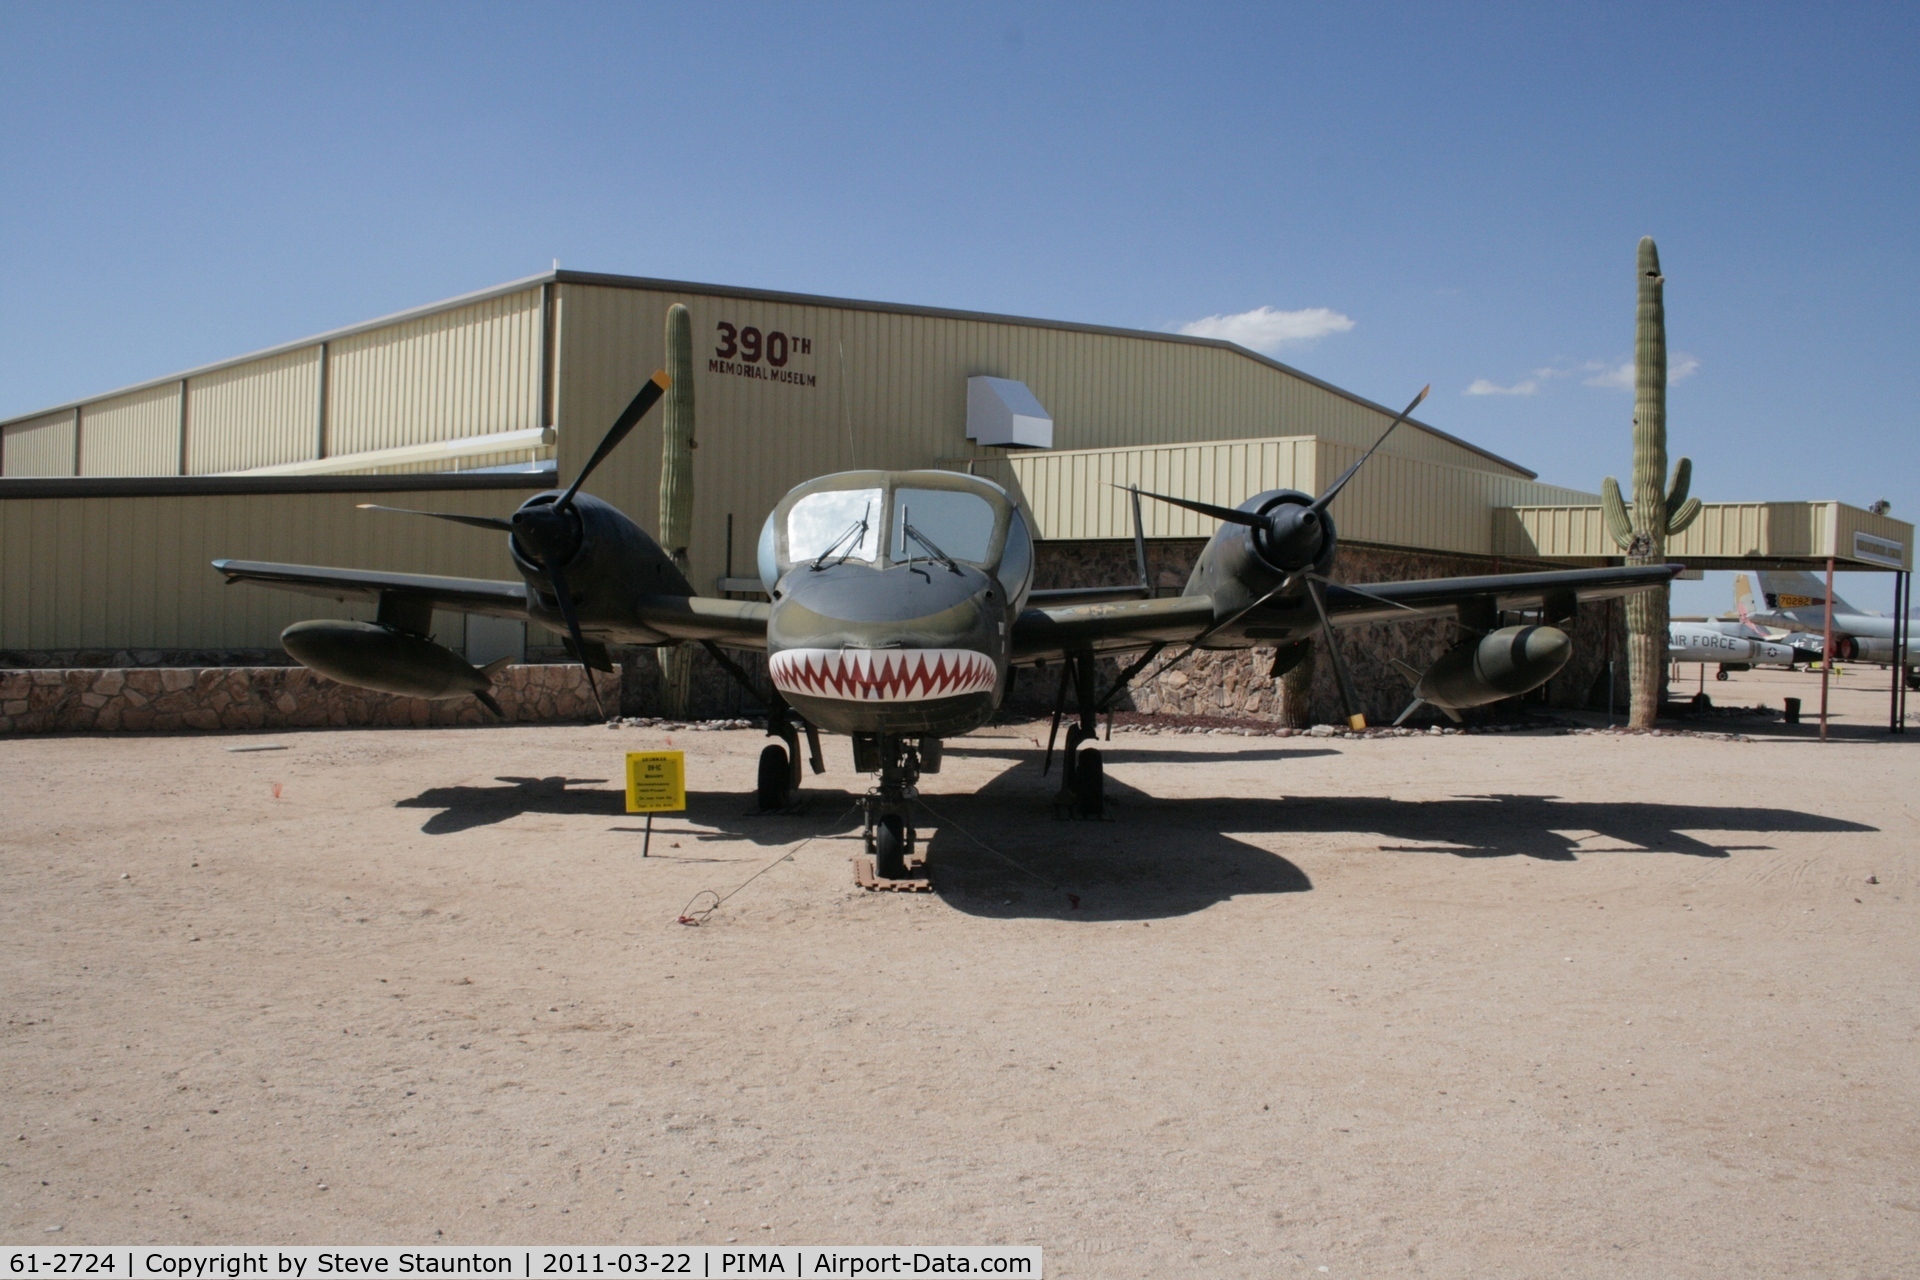 61-2724, 1961 Grumman OV-1C Mohawk C/N 67C, Taken at Pima Air and Space Museum, in March 2011 whilst on an Aeroprint Aviation tour